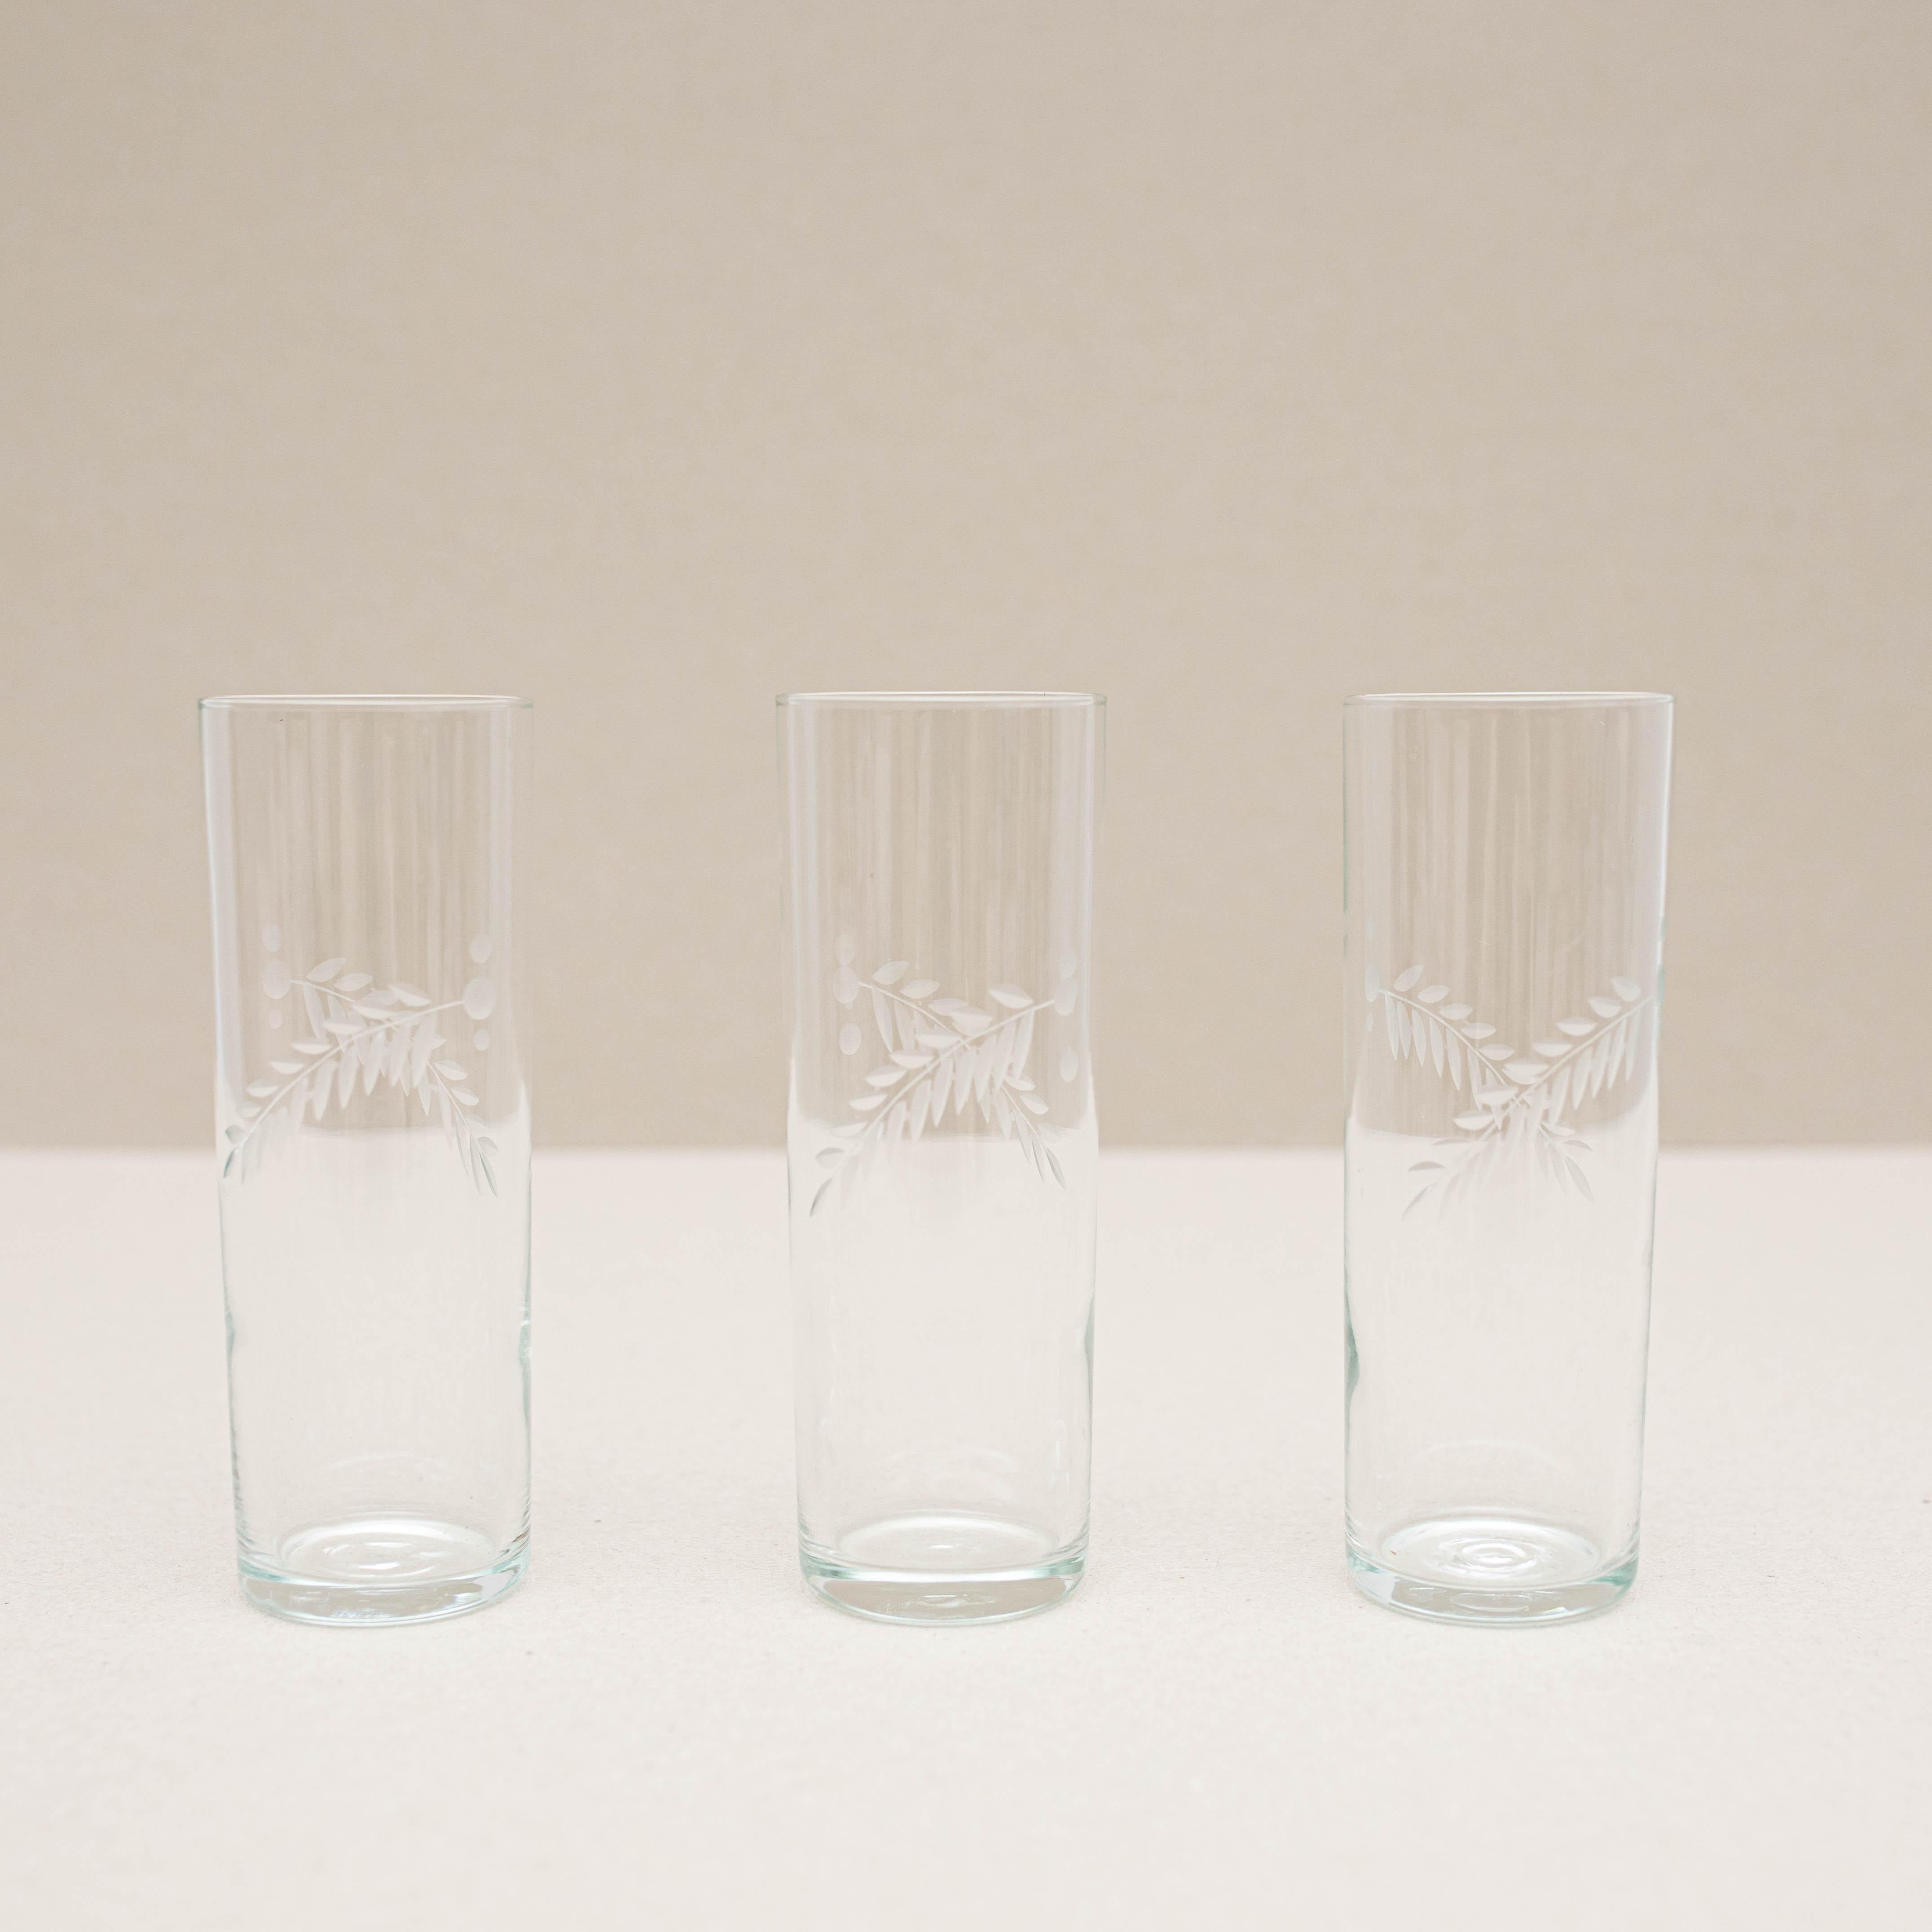 Set of 3 antique crystal glasses.

Made by unknown manufacturer in Spain, circa 1970.

In original condition, with minor wear consistent with age and use, preserving a beautiful patina.

Materials:
Glass

Dimensions:
H 16.5cm 
Ø